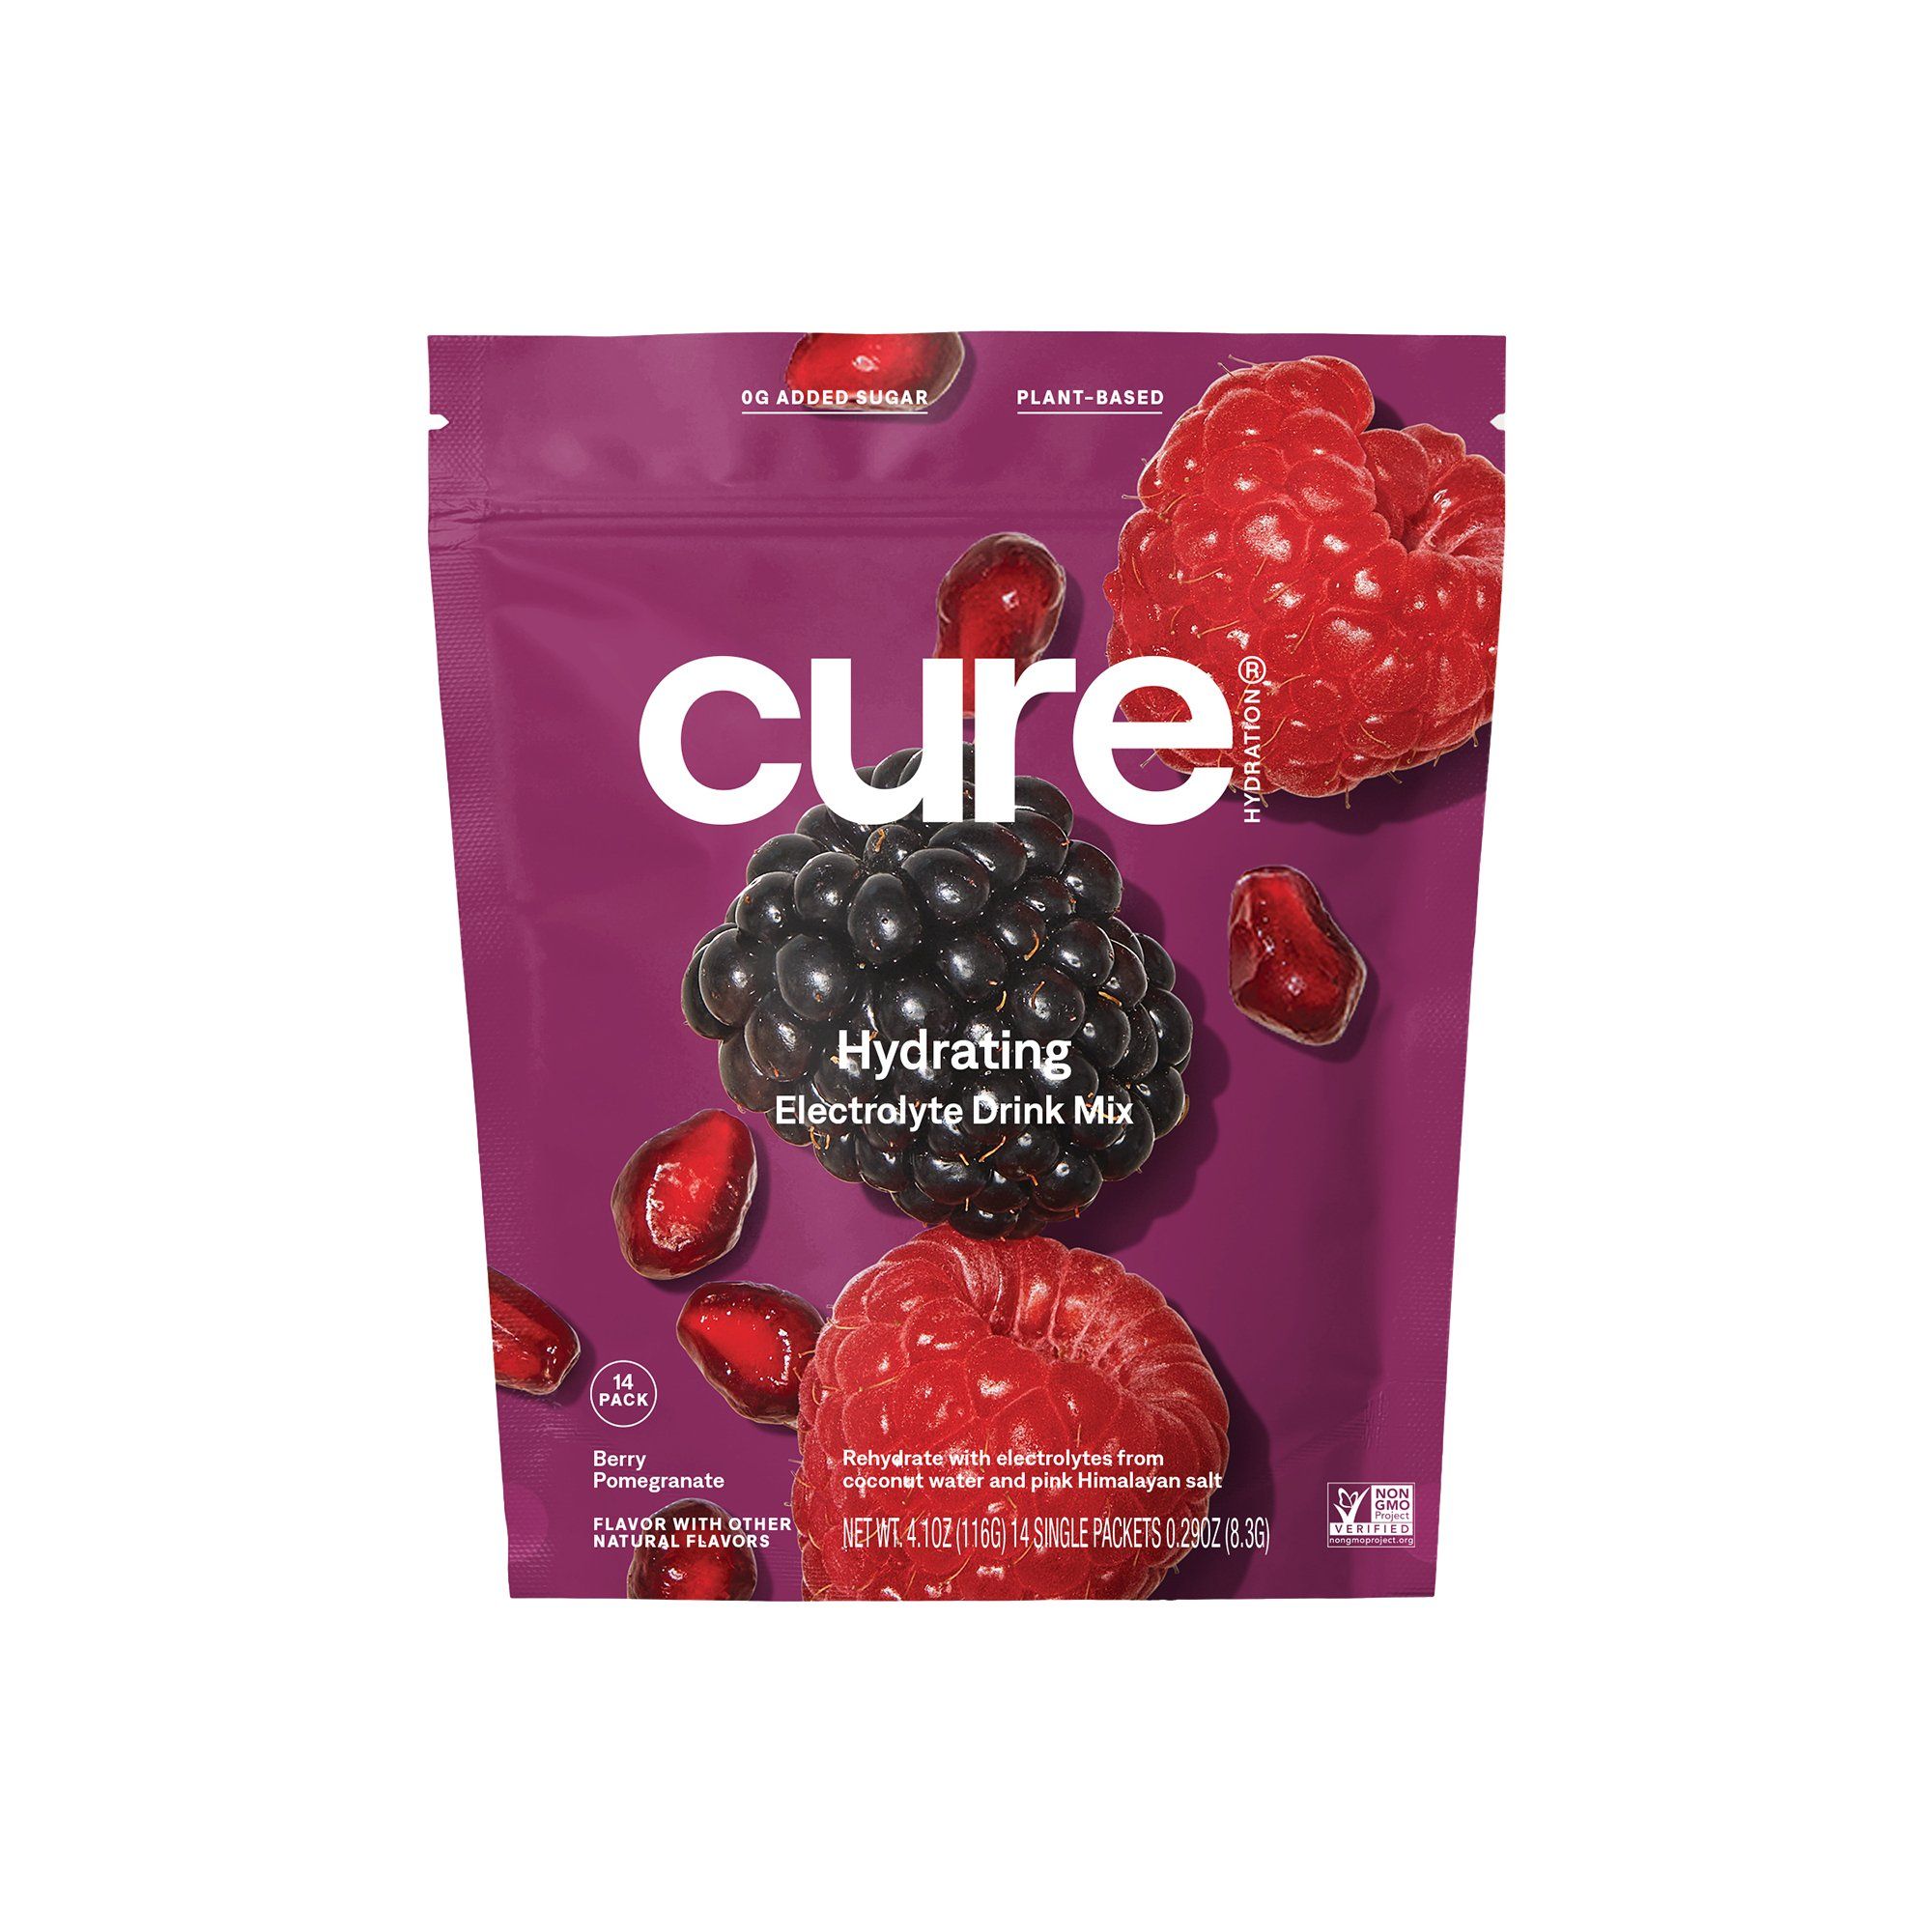 Cure Hydrating Electrolyte Mix, Berry Pomegranate - 14 Packets